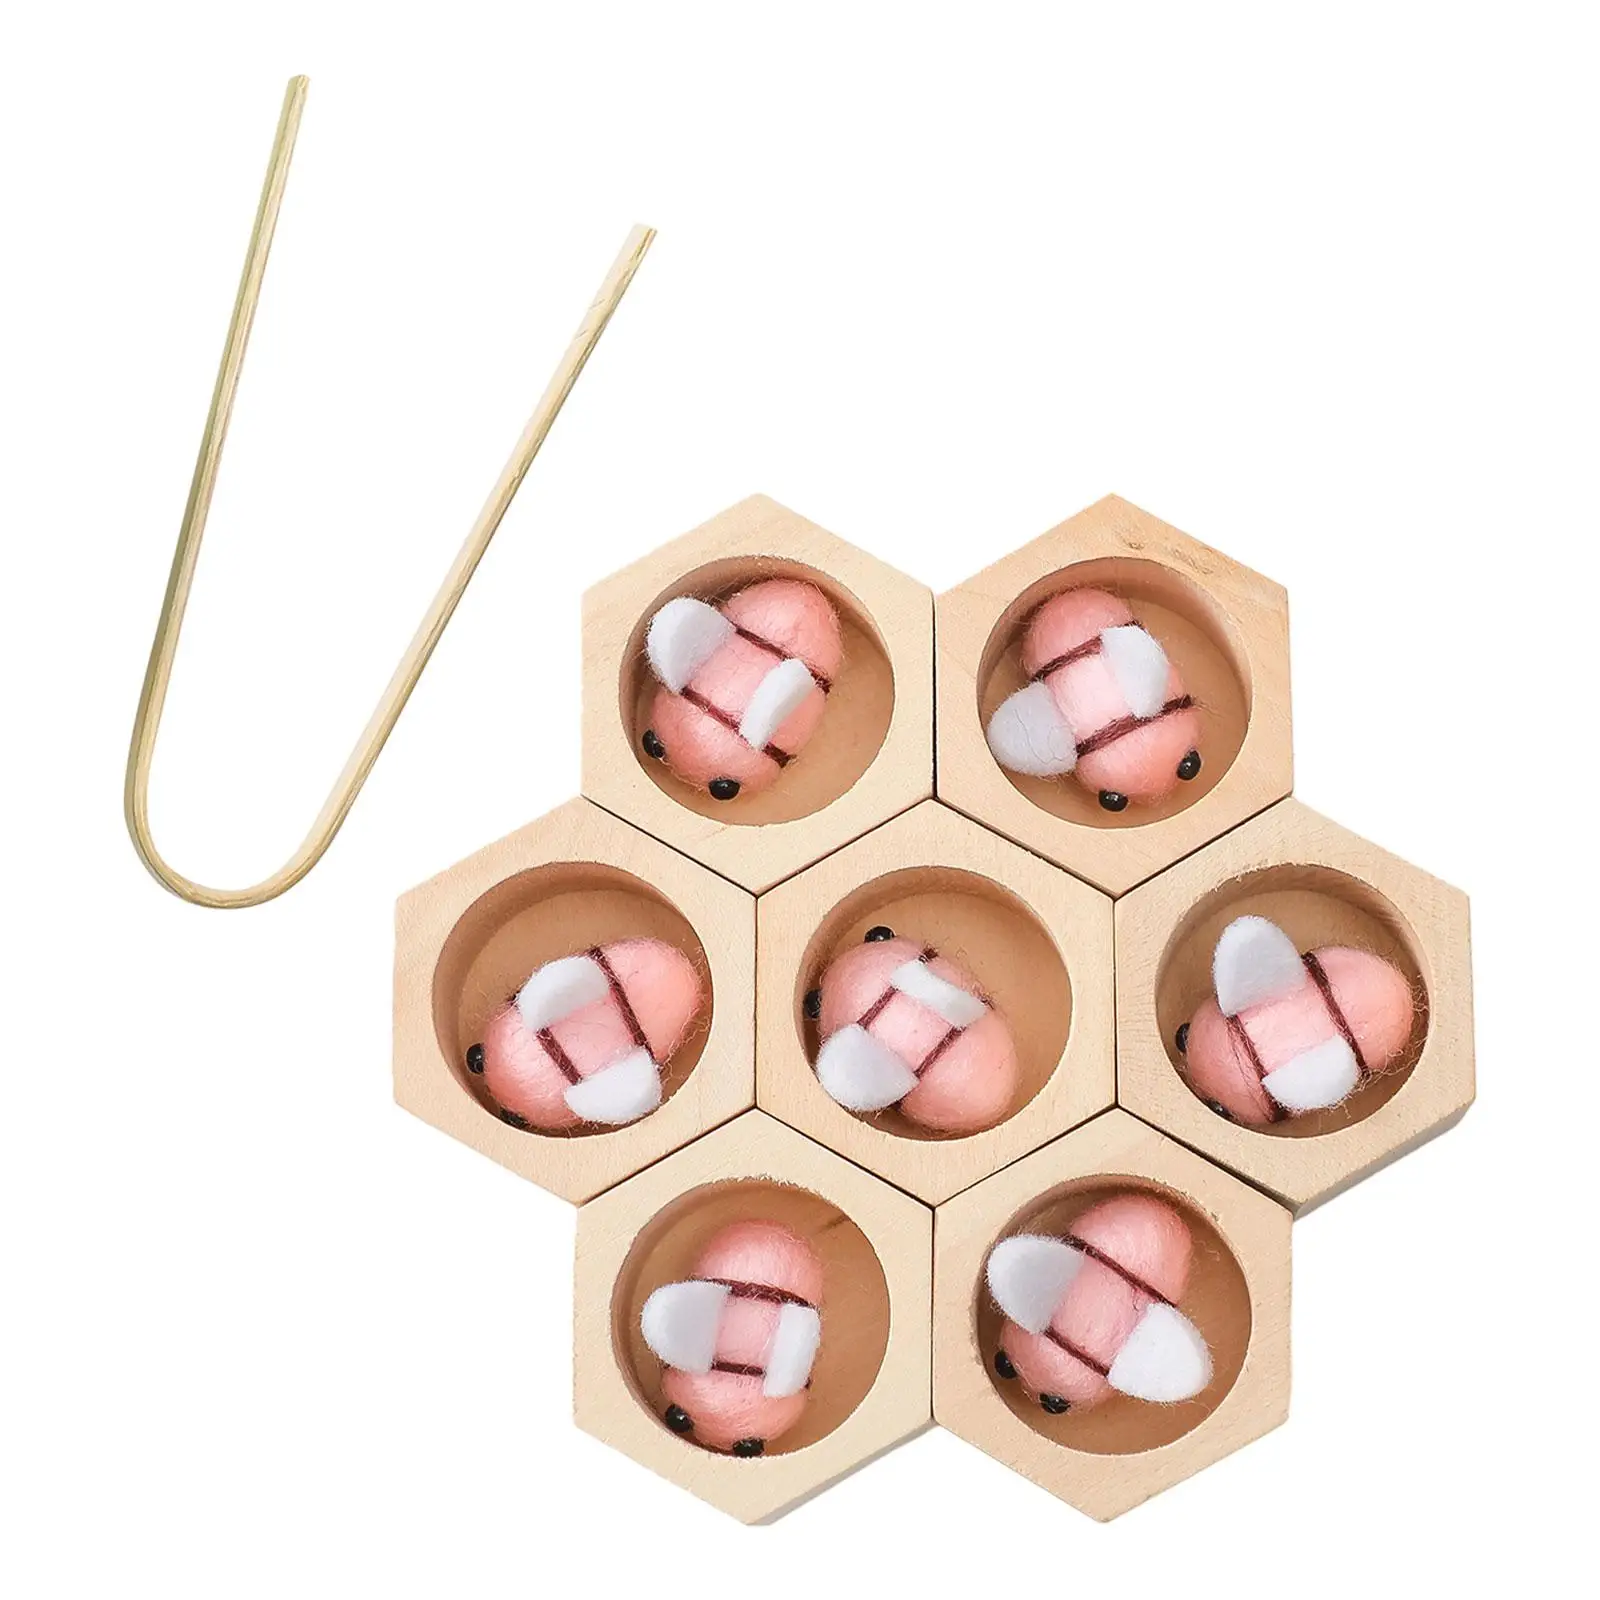 Wooden Fine Motor Skill Toy Preschool Counting Educational Toys Cognitive Clip Toy for Boys Children Kids 4 5 6 Toddlers Gifts